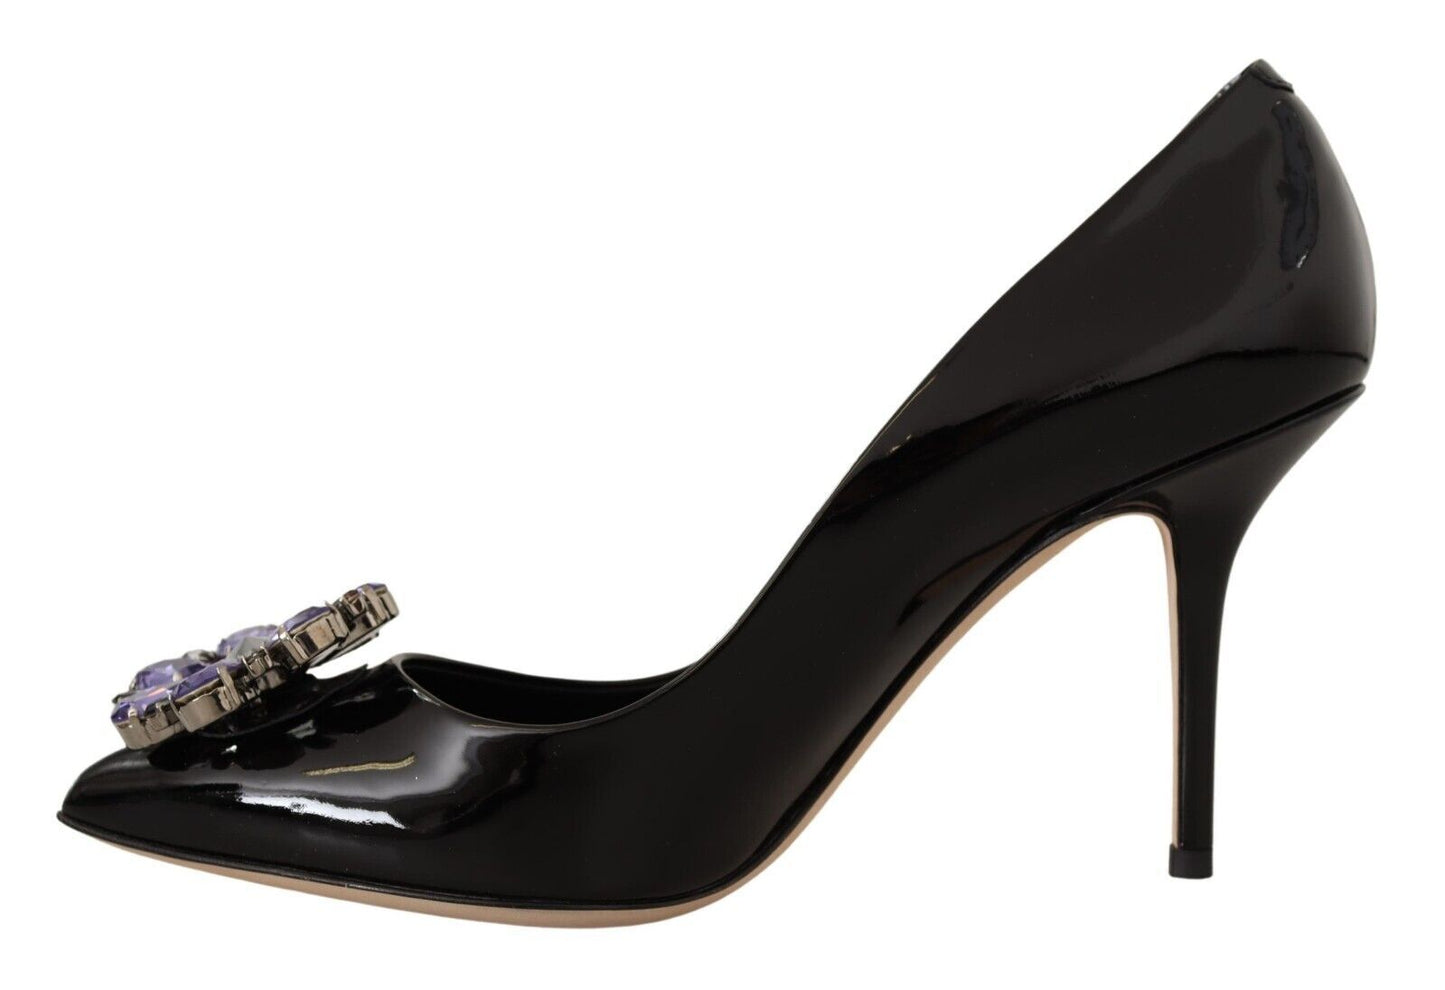 Elegant Patent Leather Pumps with Purple Crystals